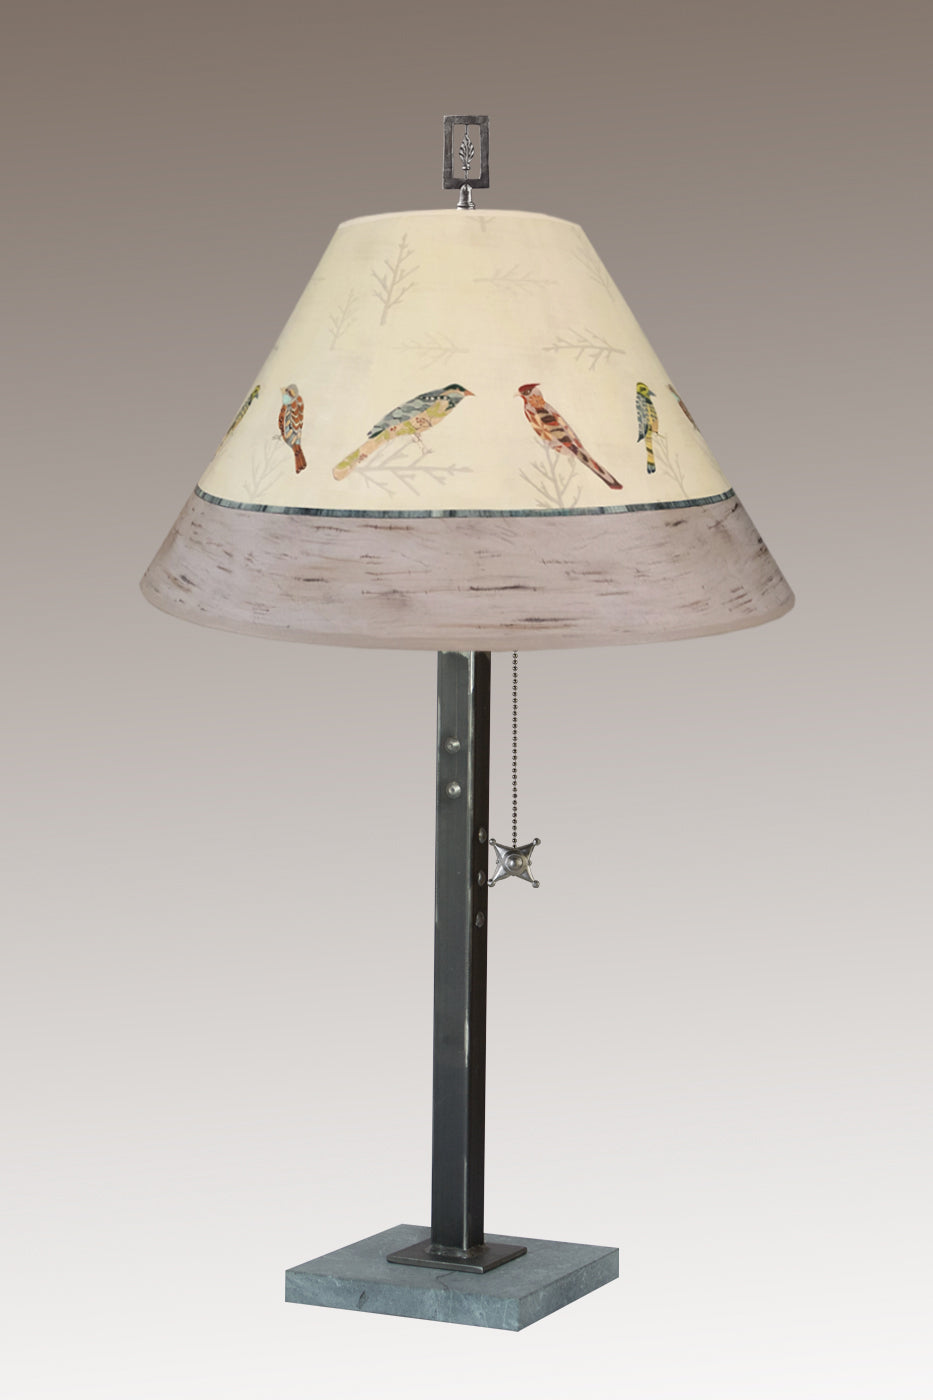 Steel Table Lamp with Medium Conical Shade in Bird Friends